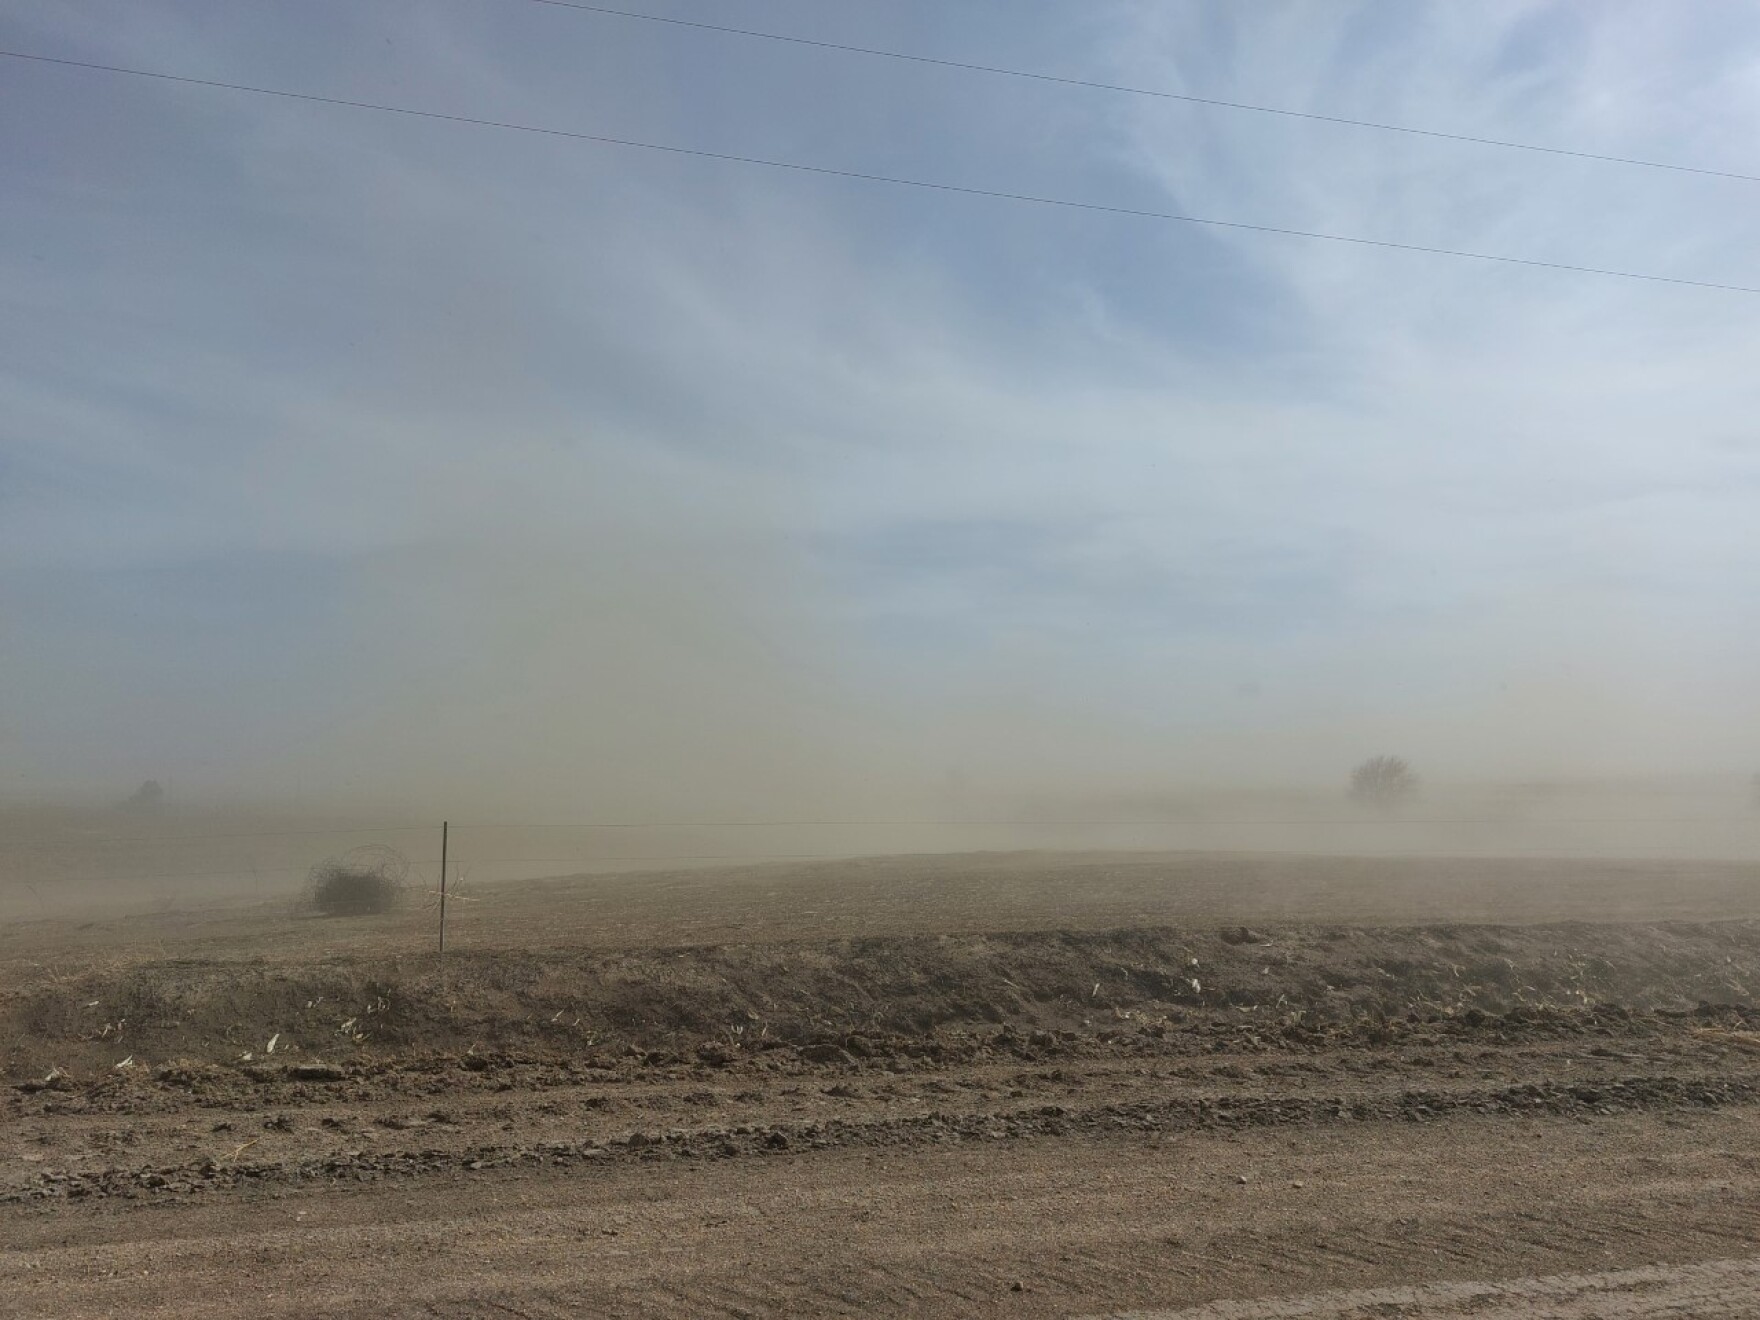 clouds of dust roll over a dry field